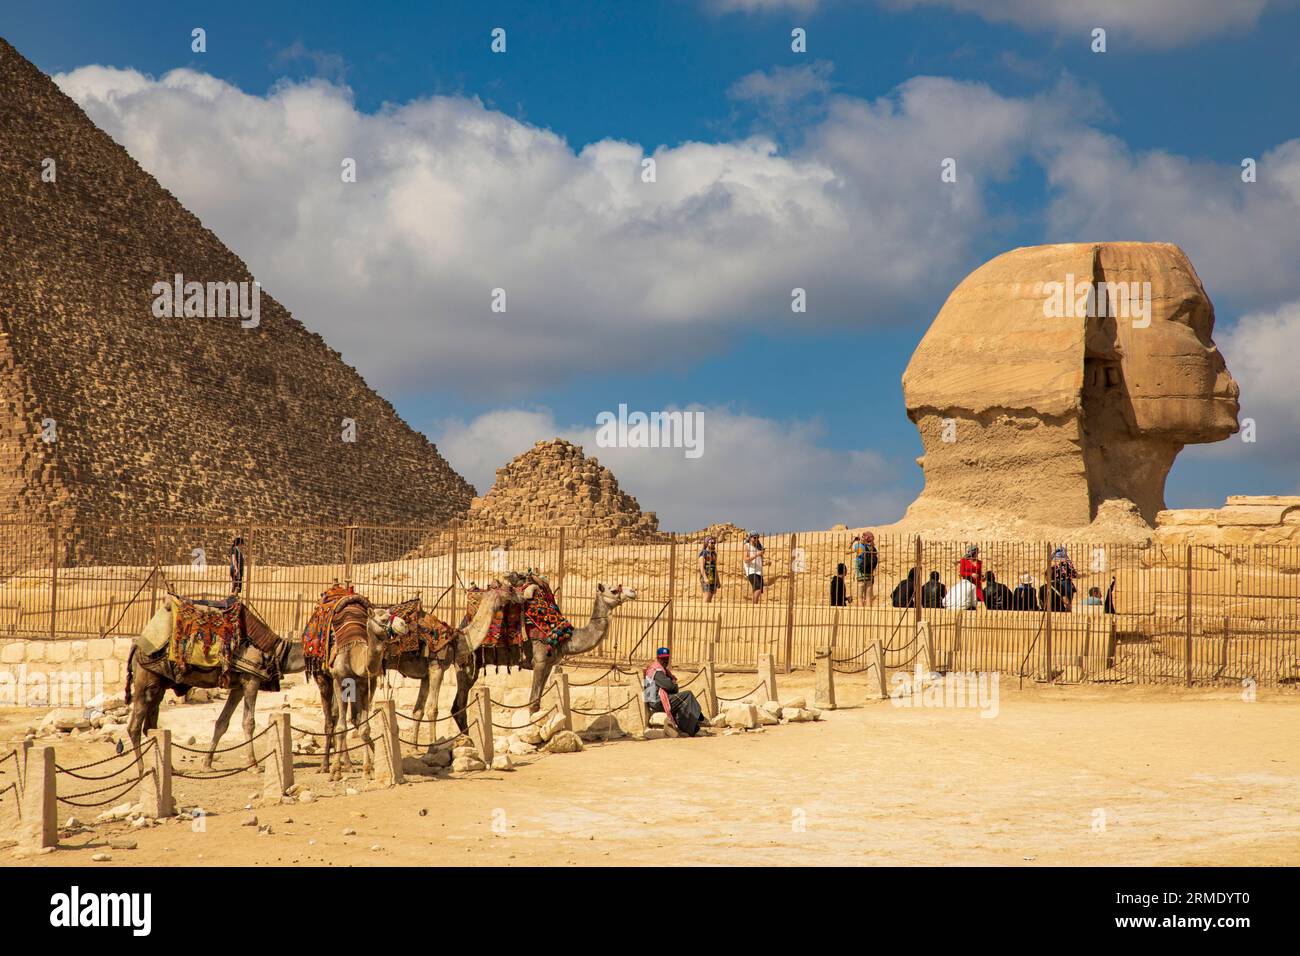 Camels standing in an enclosure next to the Great Sphinx of Giza Stock Photo